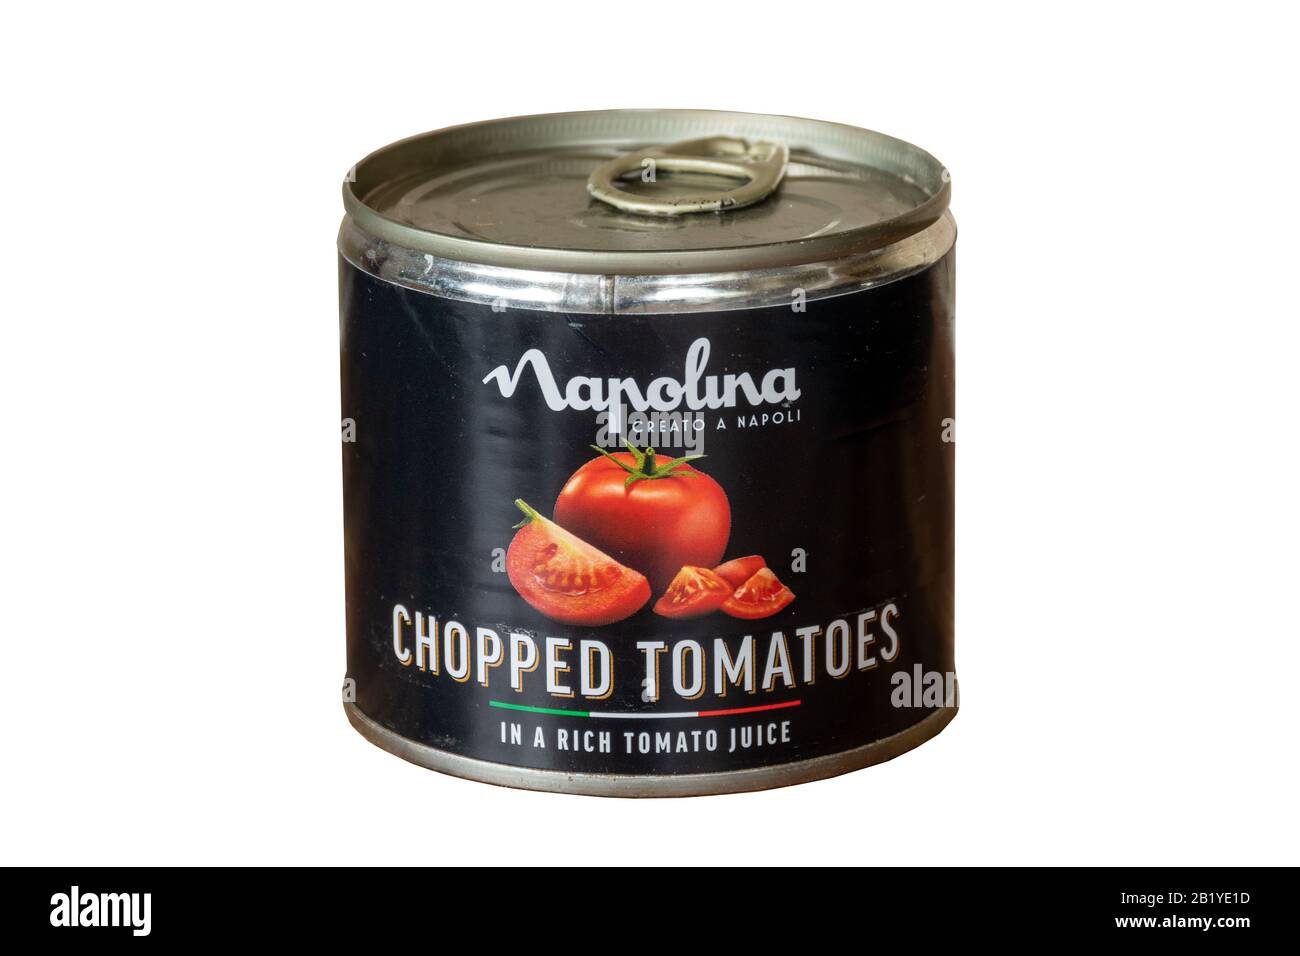 Tin of chopped tomatoes produced by Napolina, cutout on white background, UK tinned or canned food Stock Photo